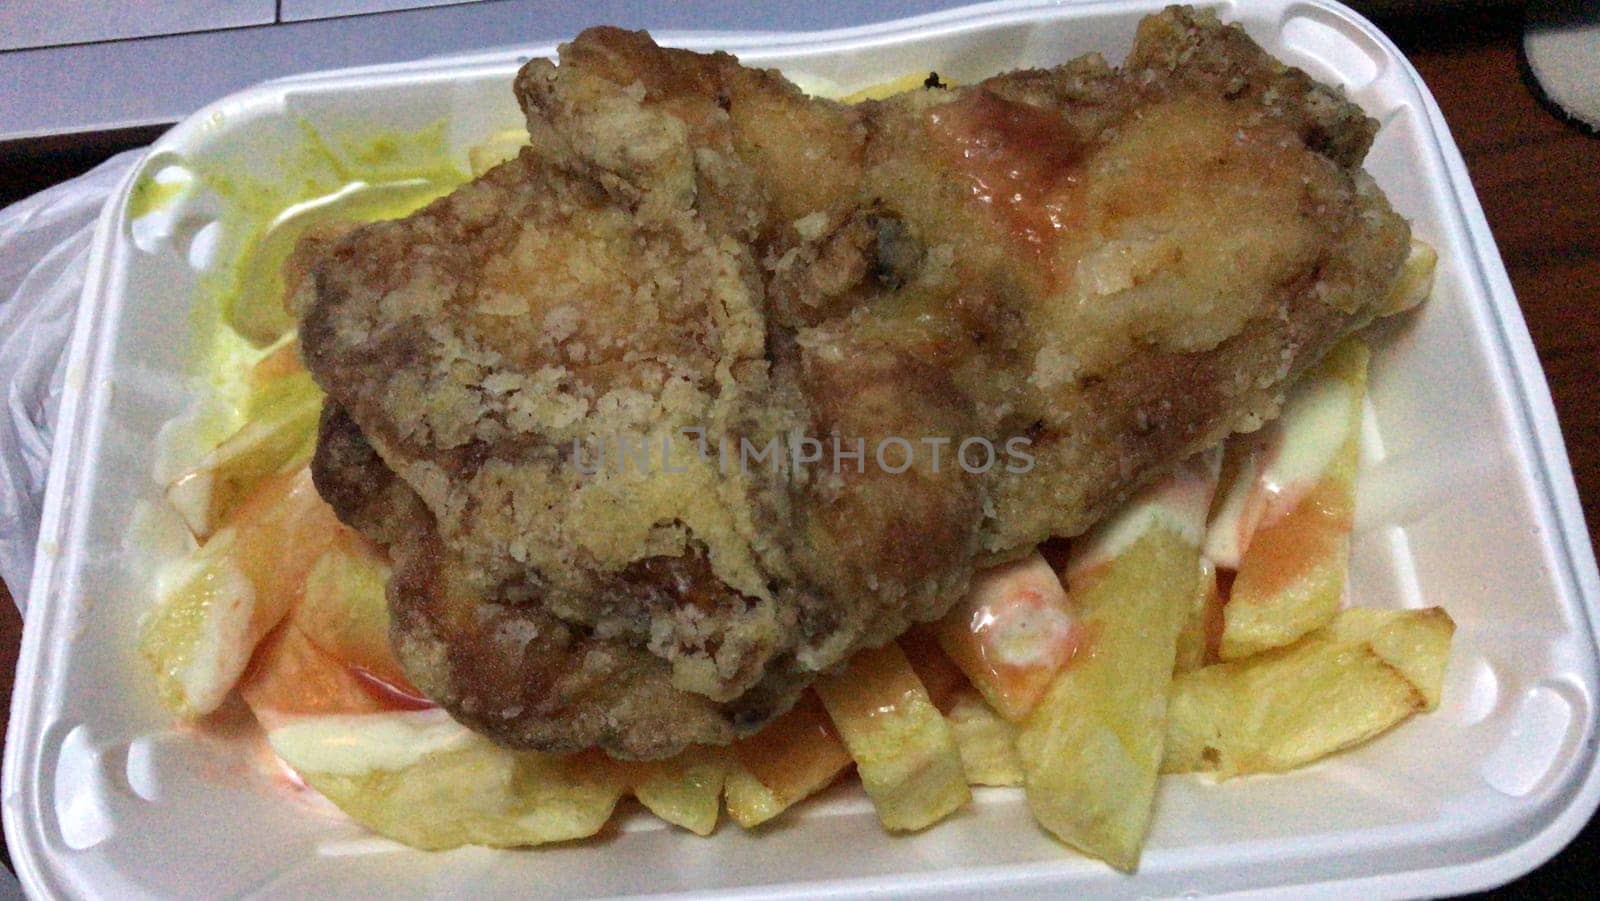 Crispy fried chicken paired with golden fries and salad in a white styrofoam container